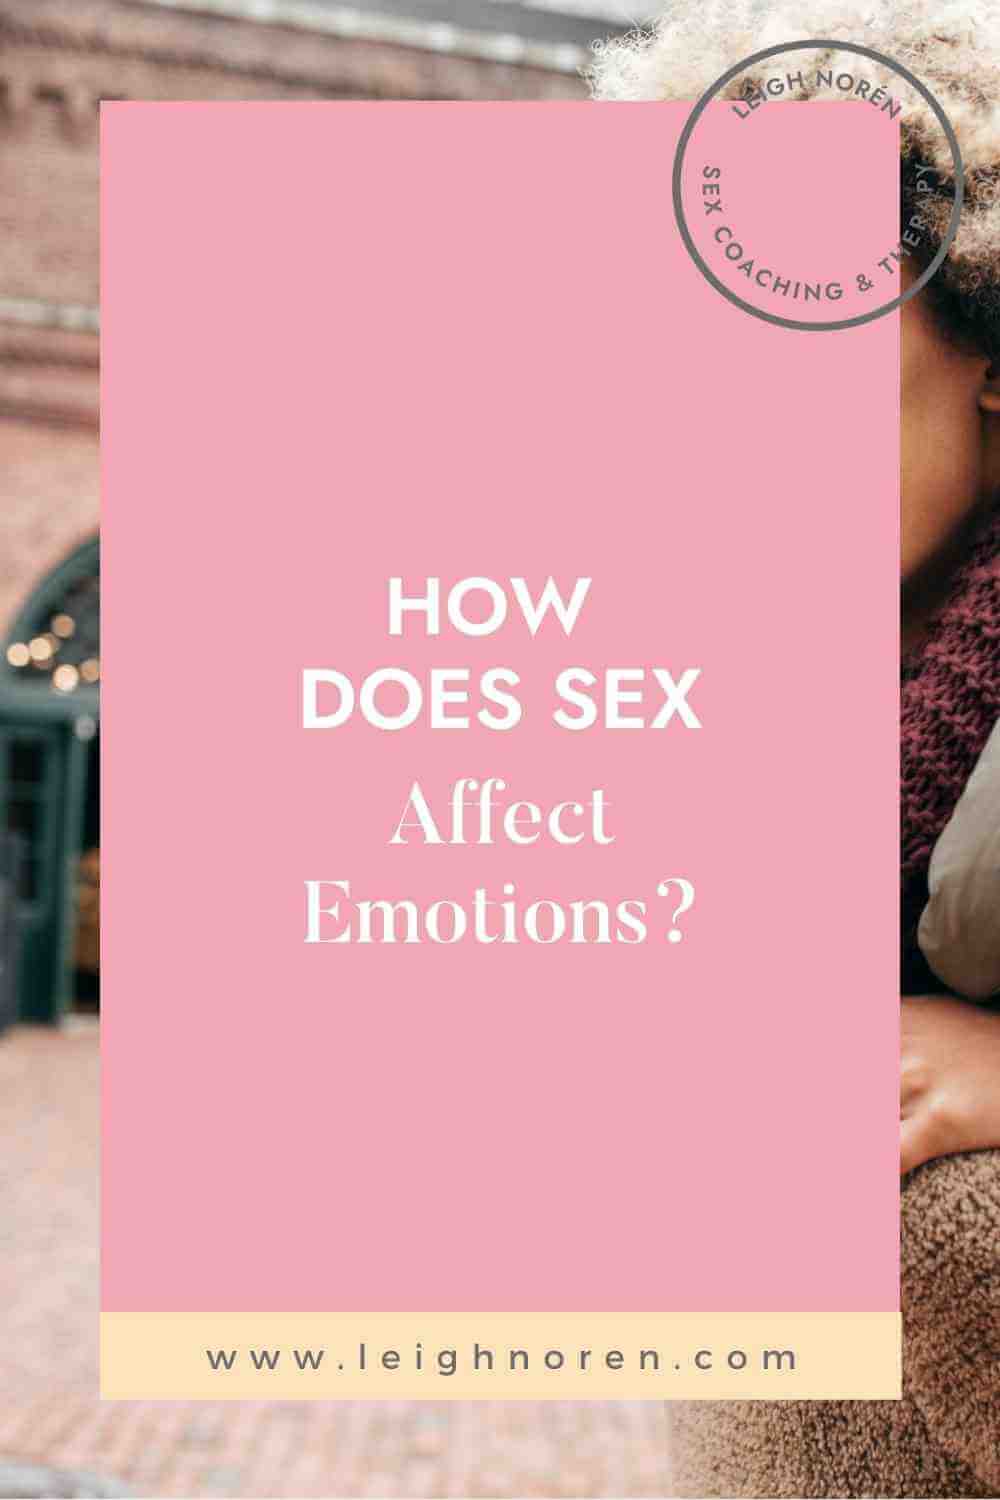 How Does Sex Affect Emotions?